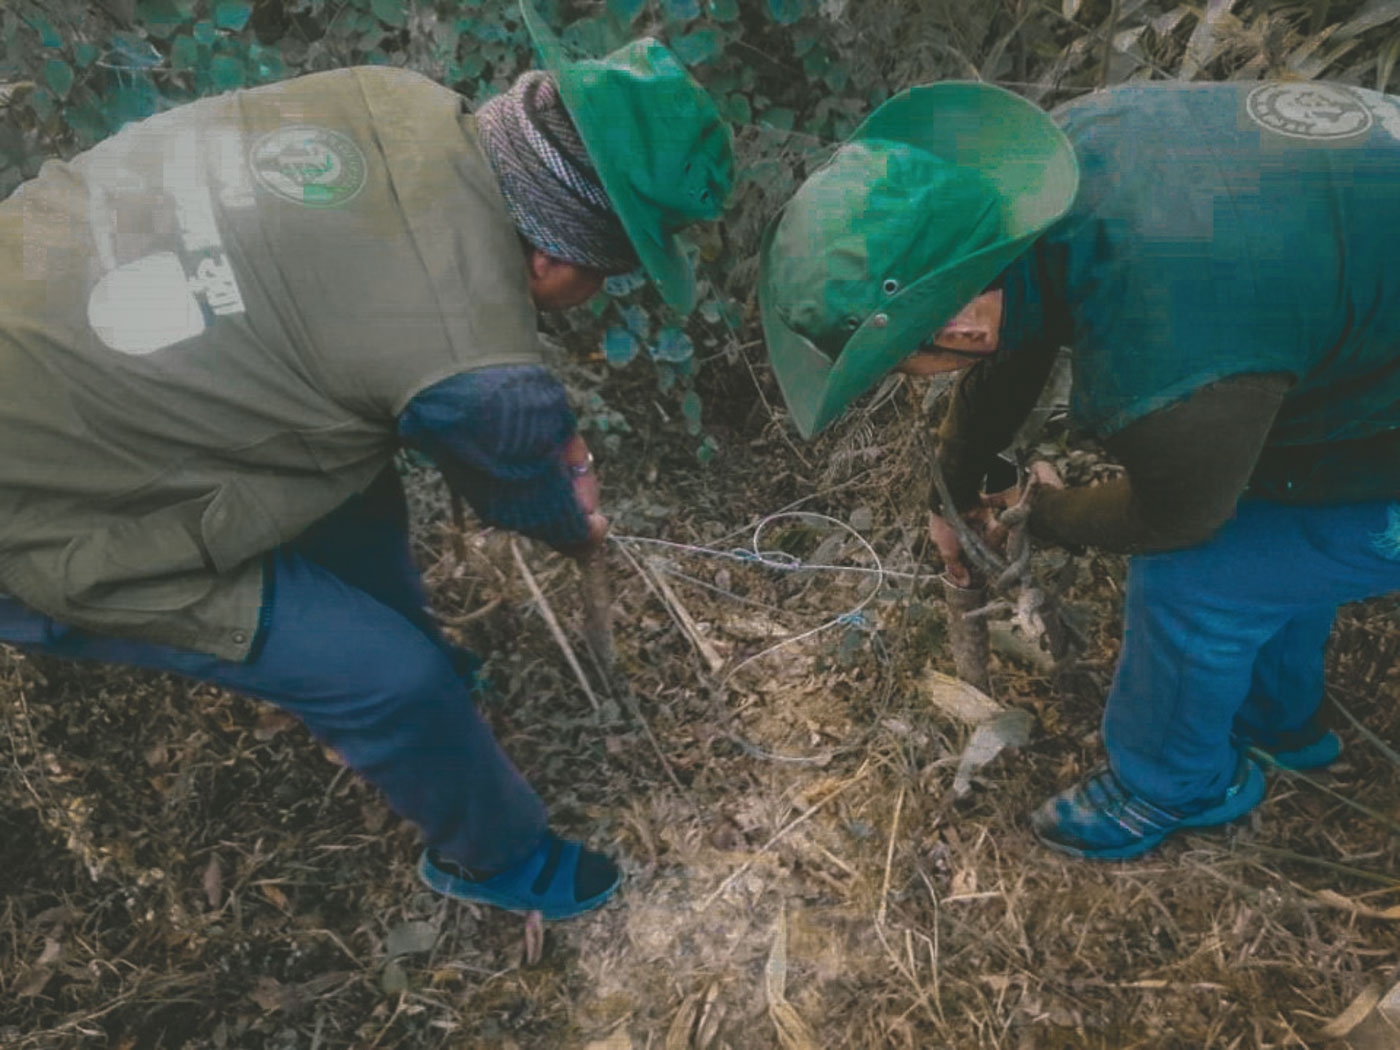 MOST POACHED. Members of a community-based anti-poaching unit removing animal snares in Kavre district, Nepal. Nepal has not recorded any major busts so far, but wildlife law enforcement experts say that pangolins have become the most poached wildlife in the country in recent years. © Zoological Society of London / Himalayan Nature 